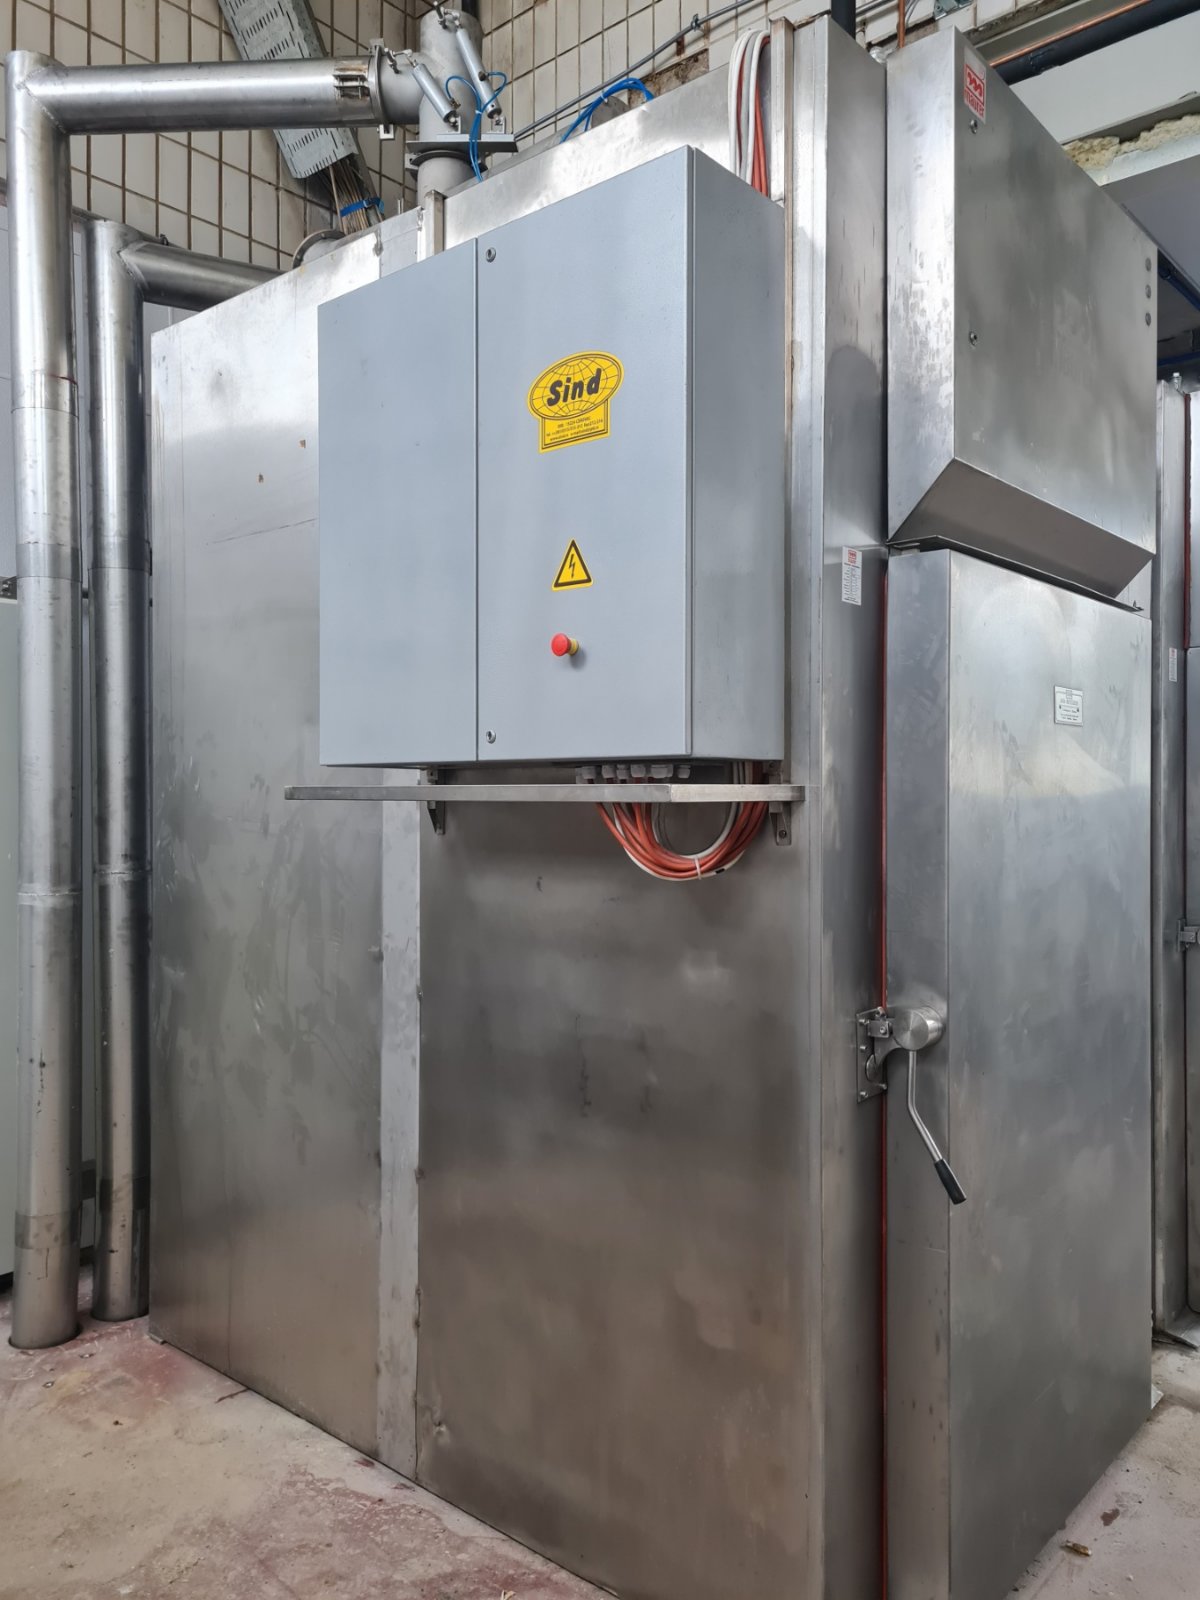 Commissioning of Maurer smoke chamber for 2 carts, buyer from Austria / Österreich